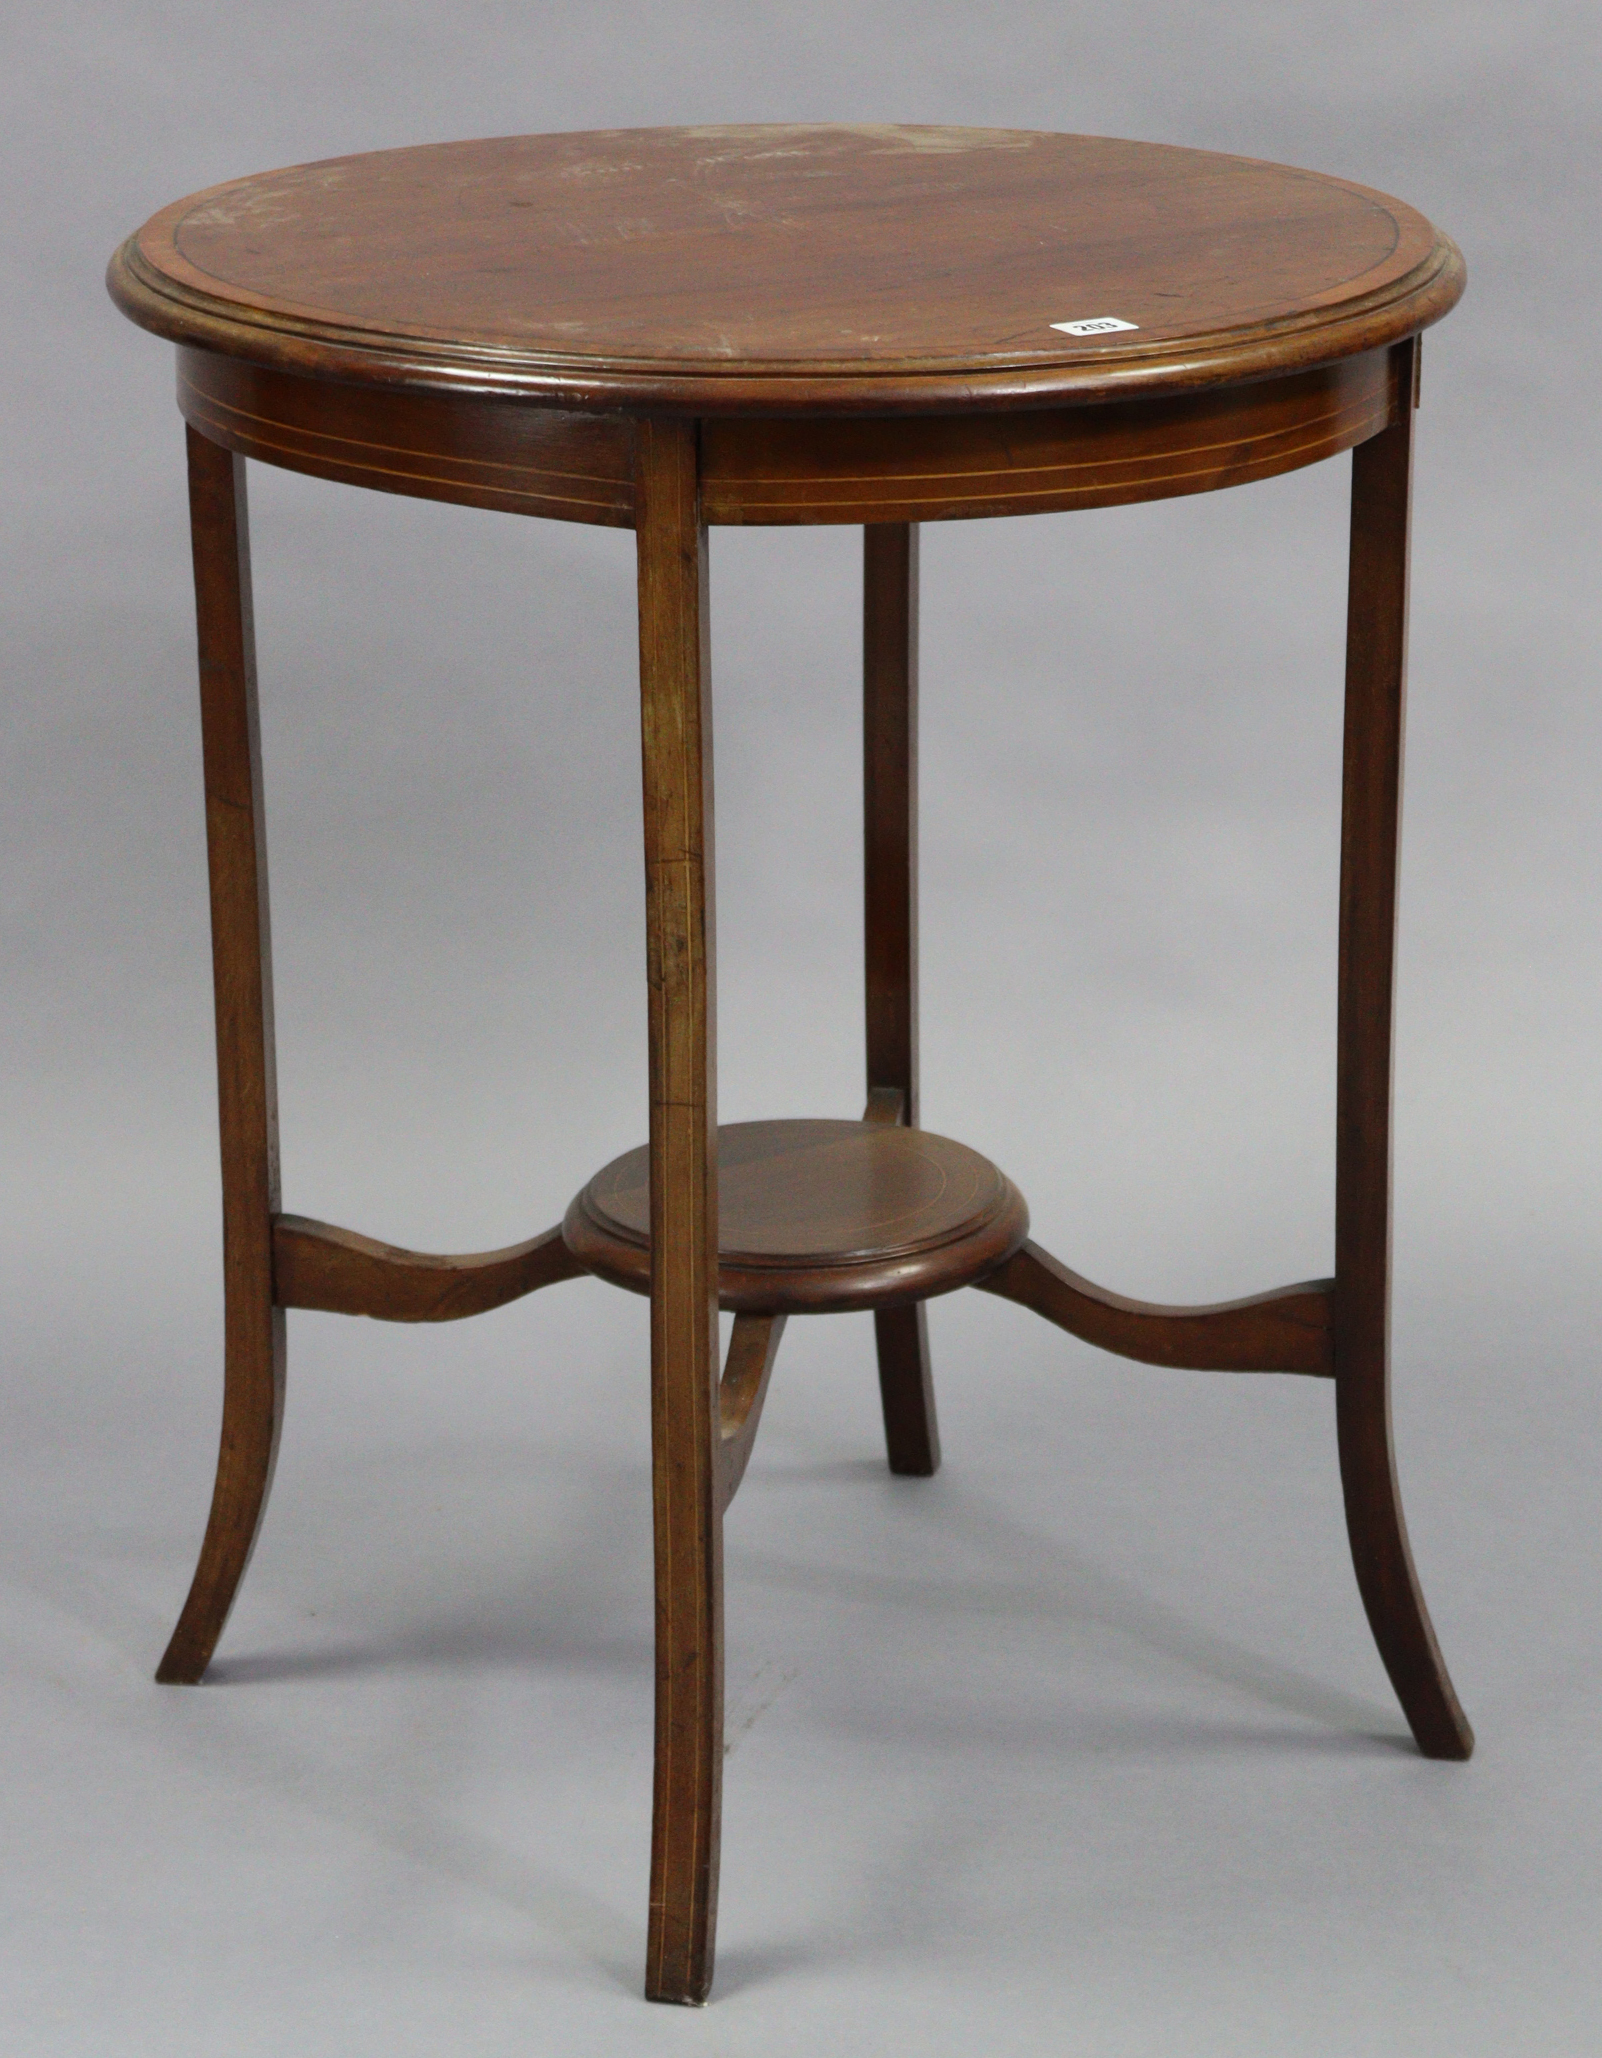 An Edwardian inlaid-mahogany circular two-tier occasional table on four shaped legs, 24” diameter